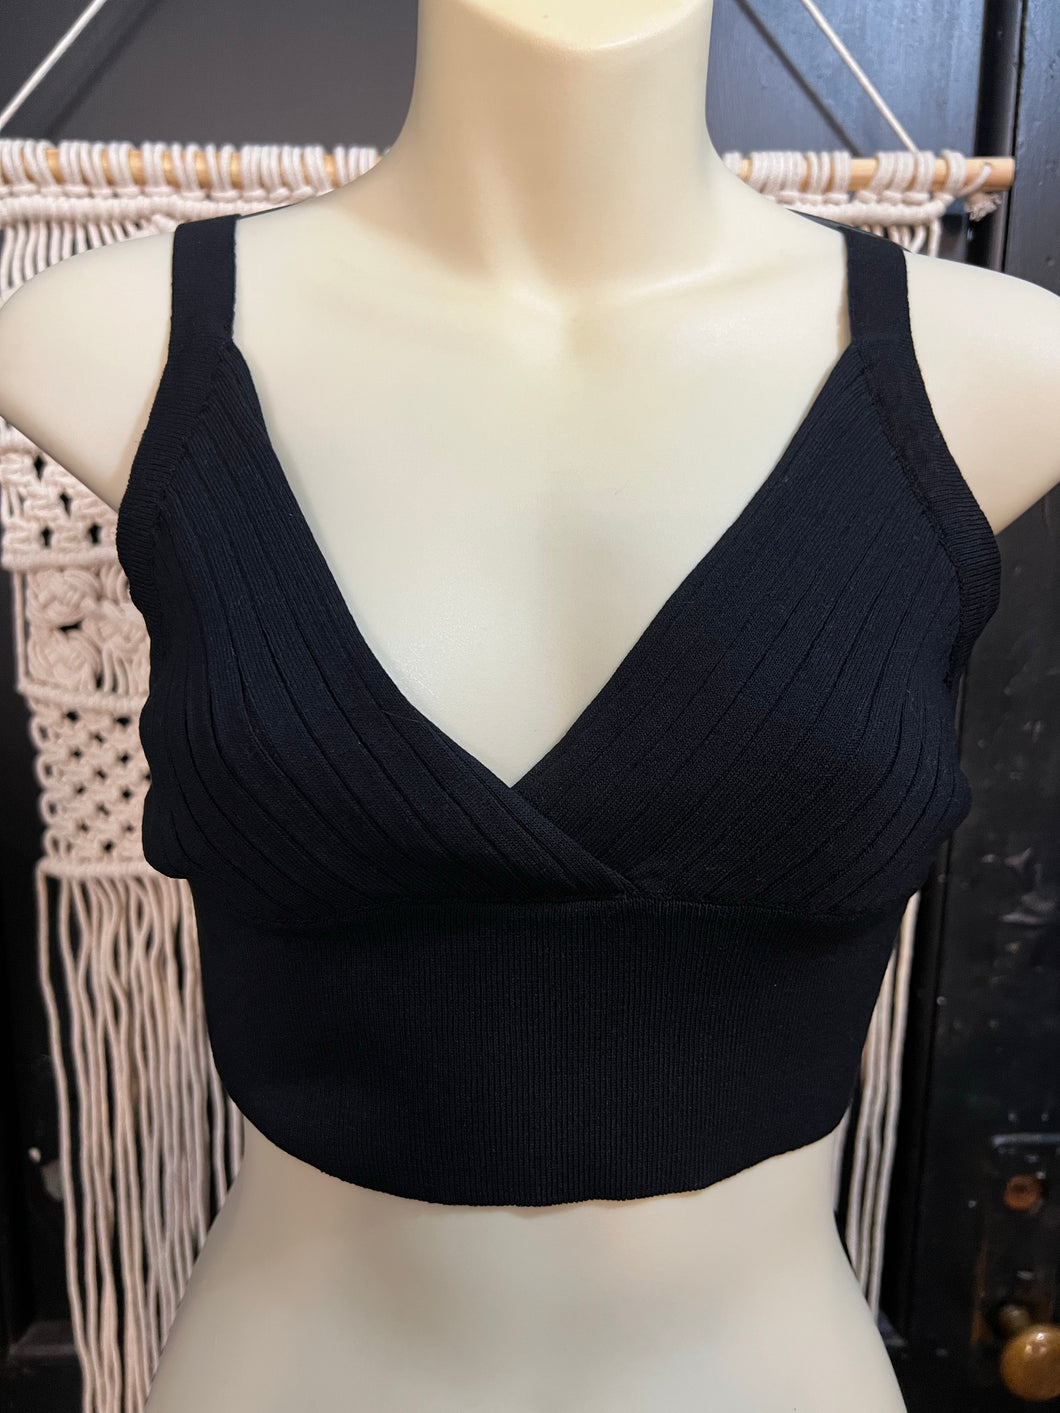 The Lizzie's Basic Bralettes